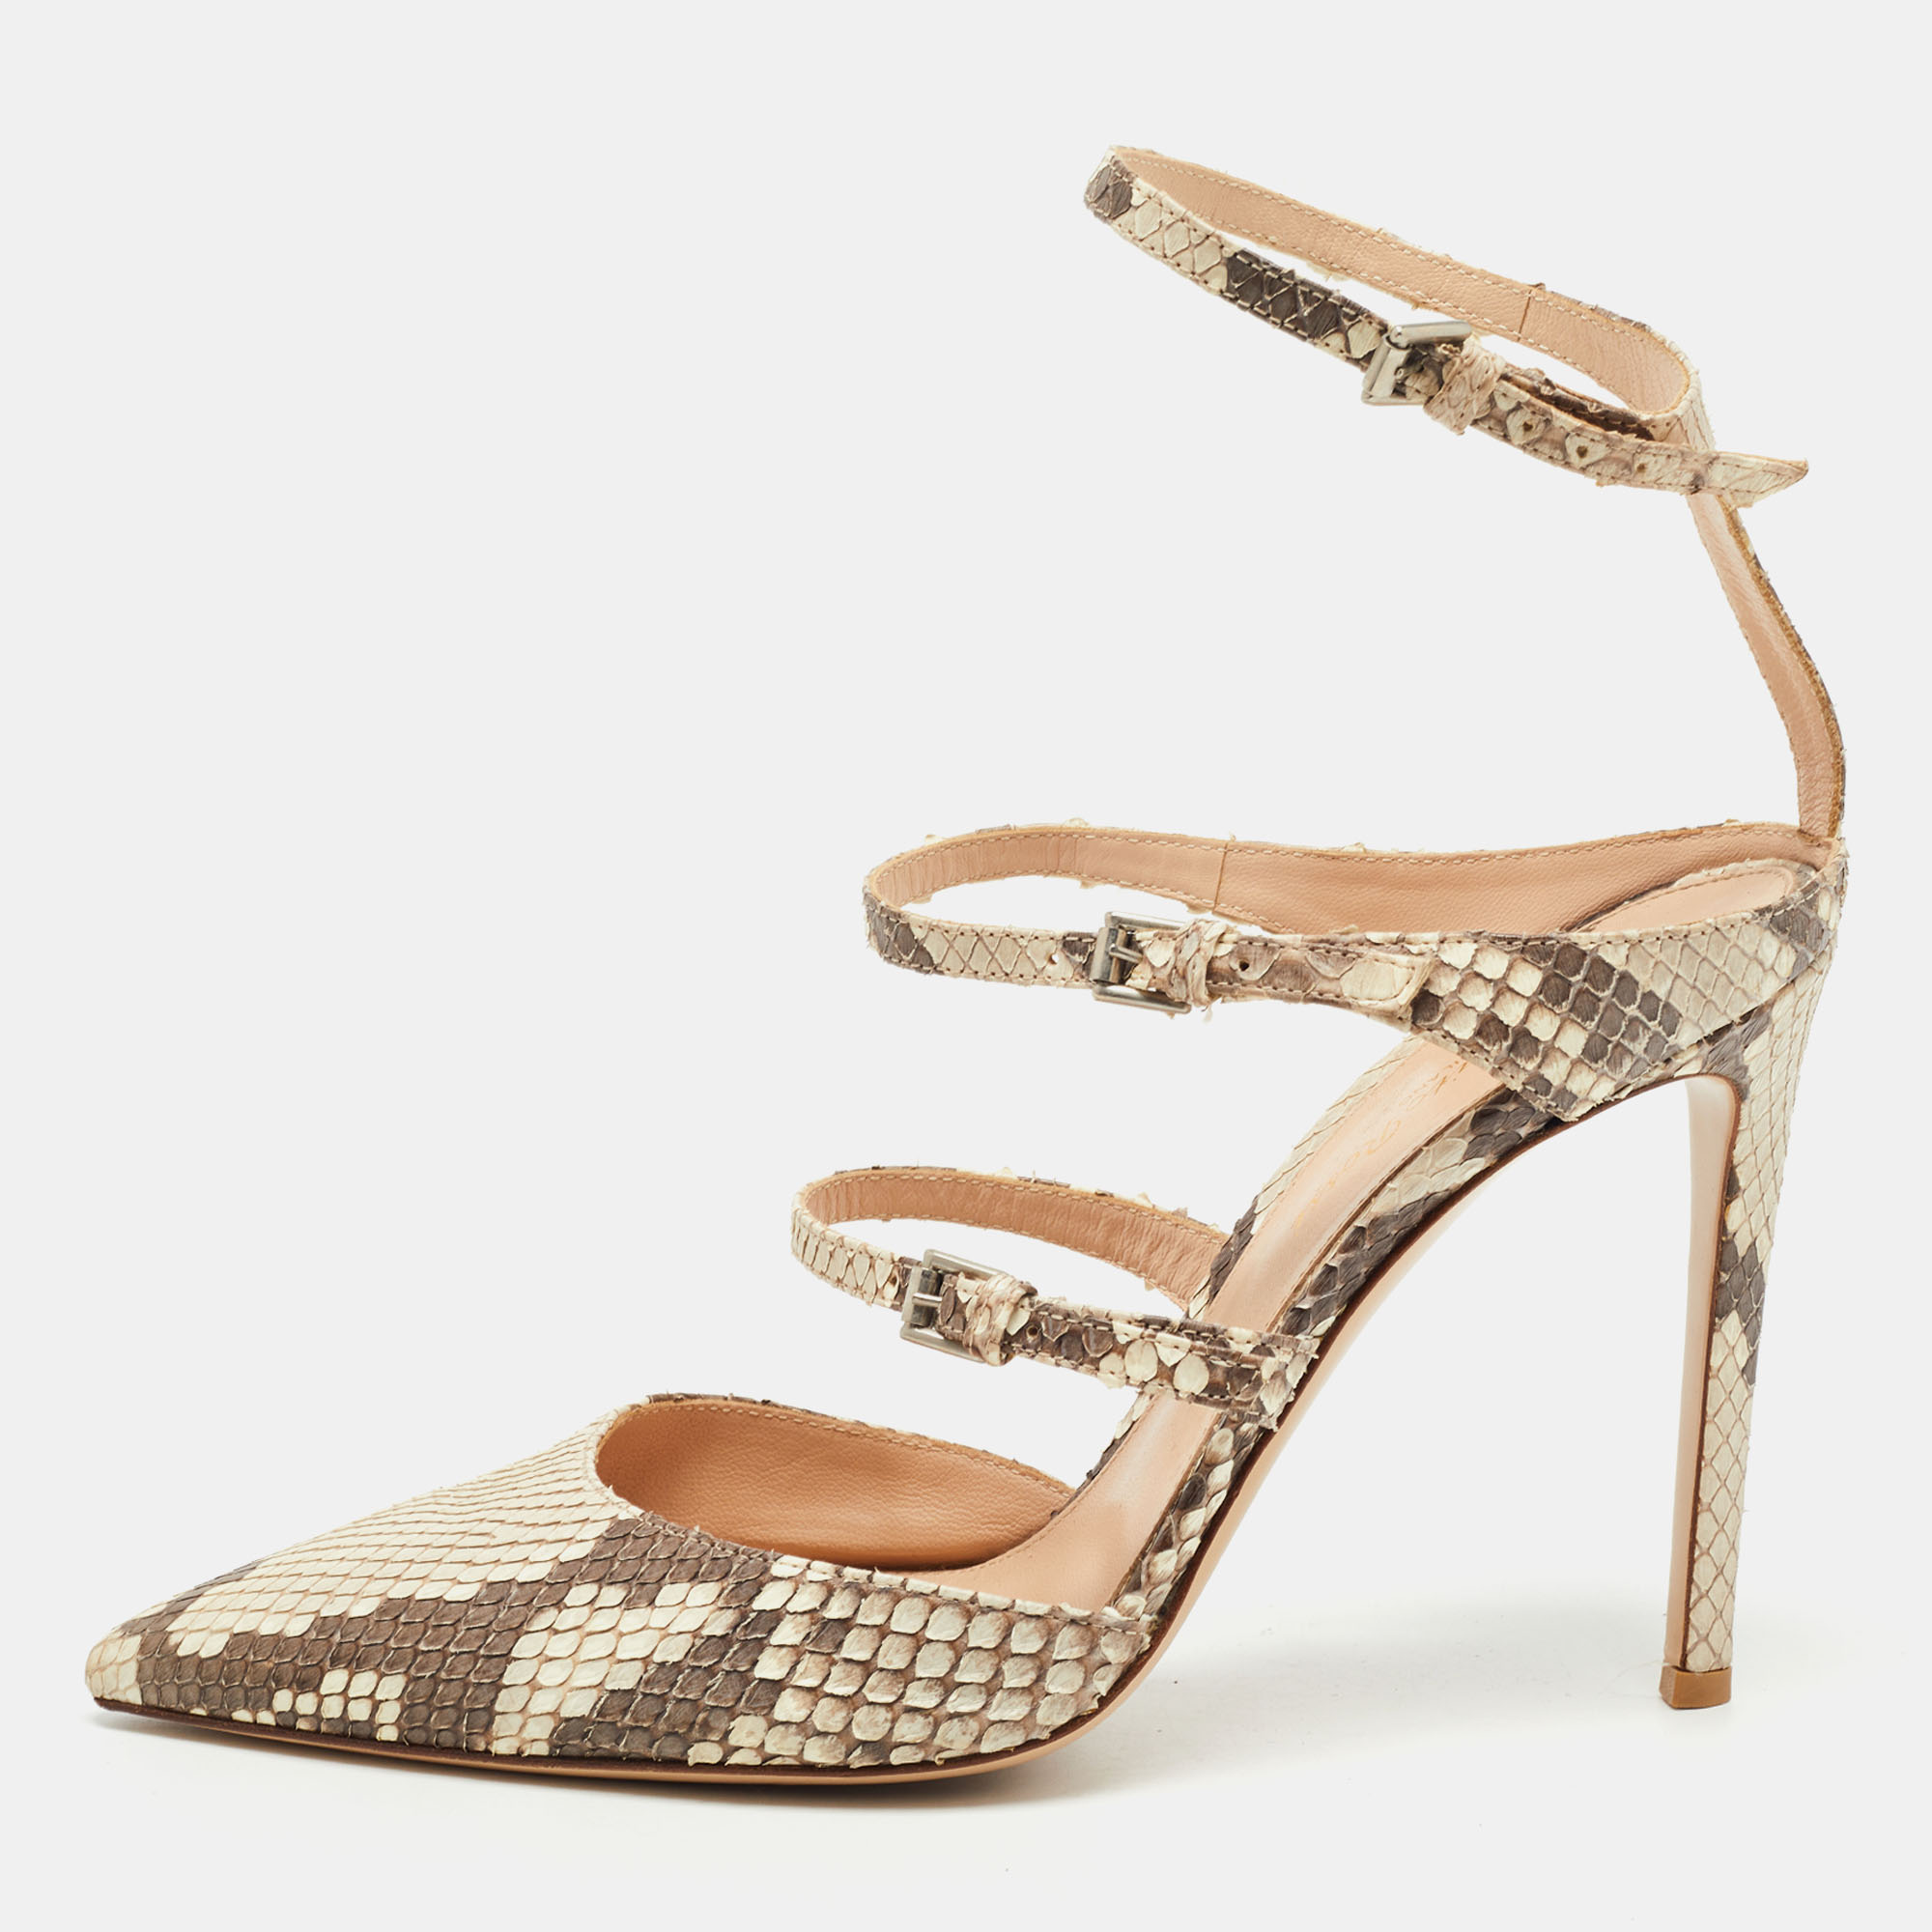 Pre-owned Gianvito Rossi Beige/brown Python Embossed Leather Ankle Strap Pumps Size 39